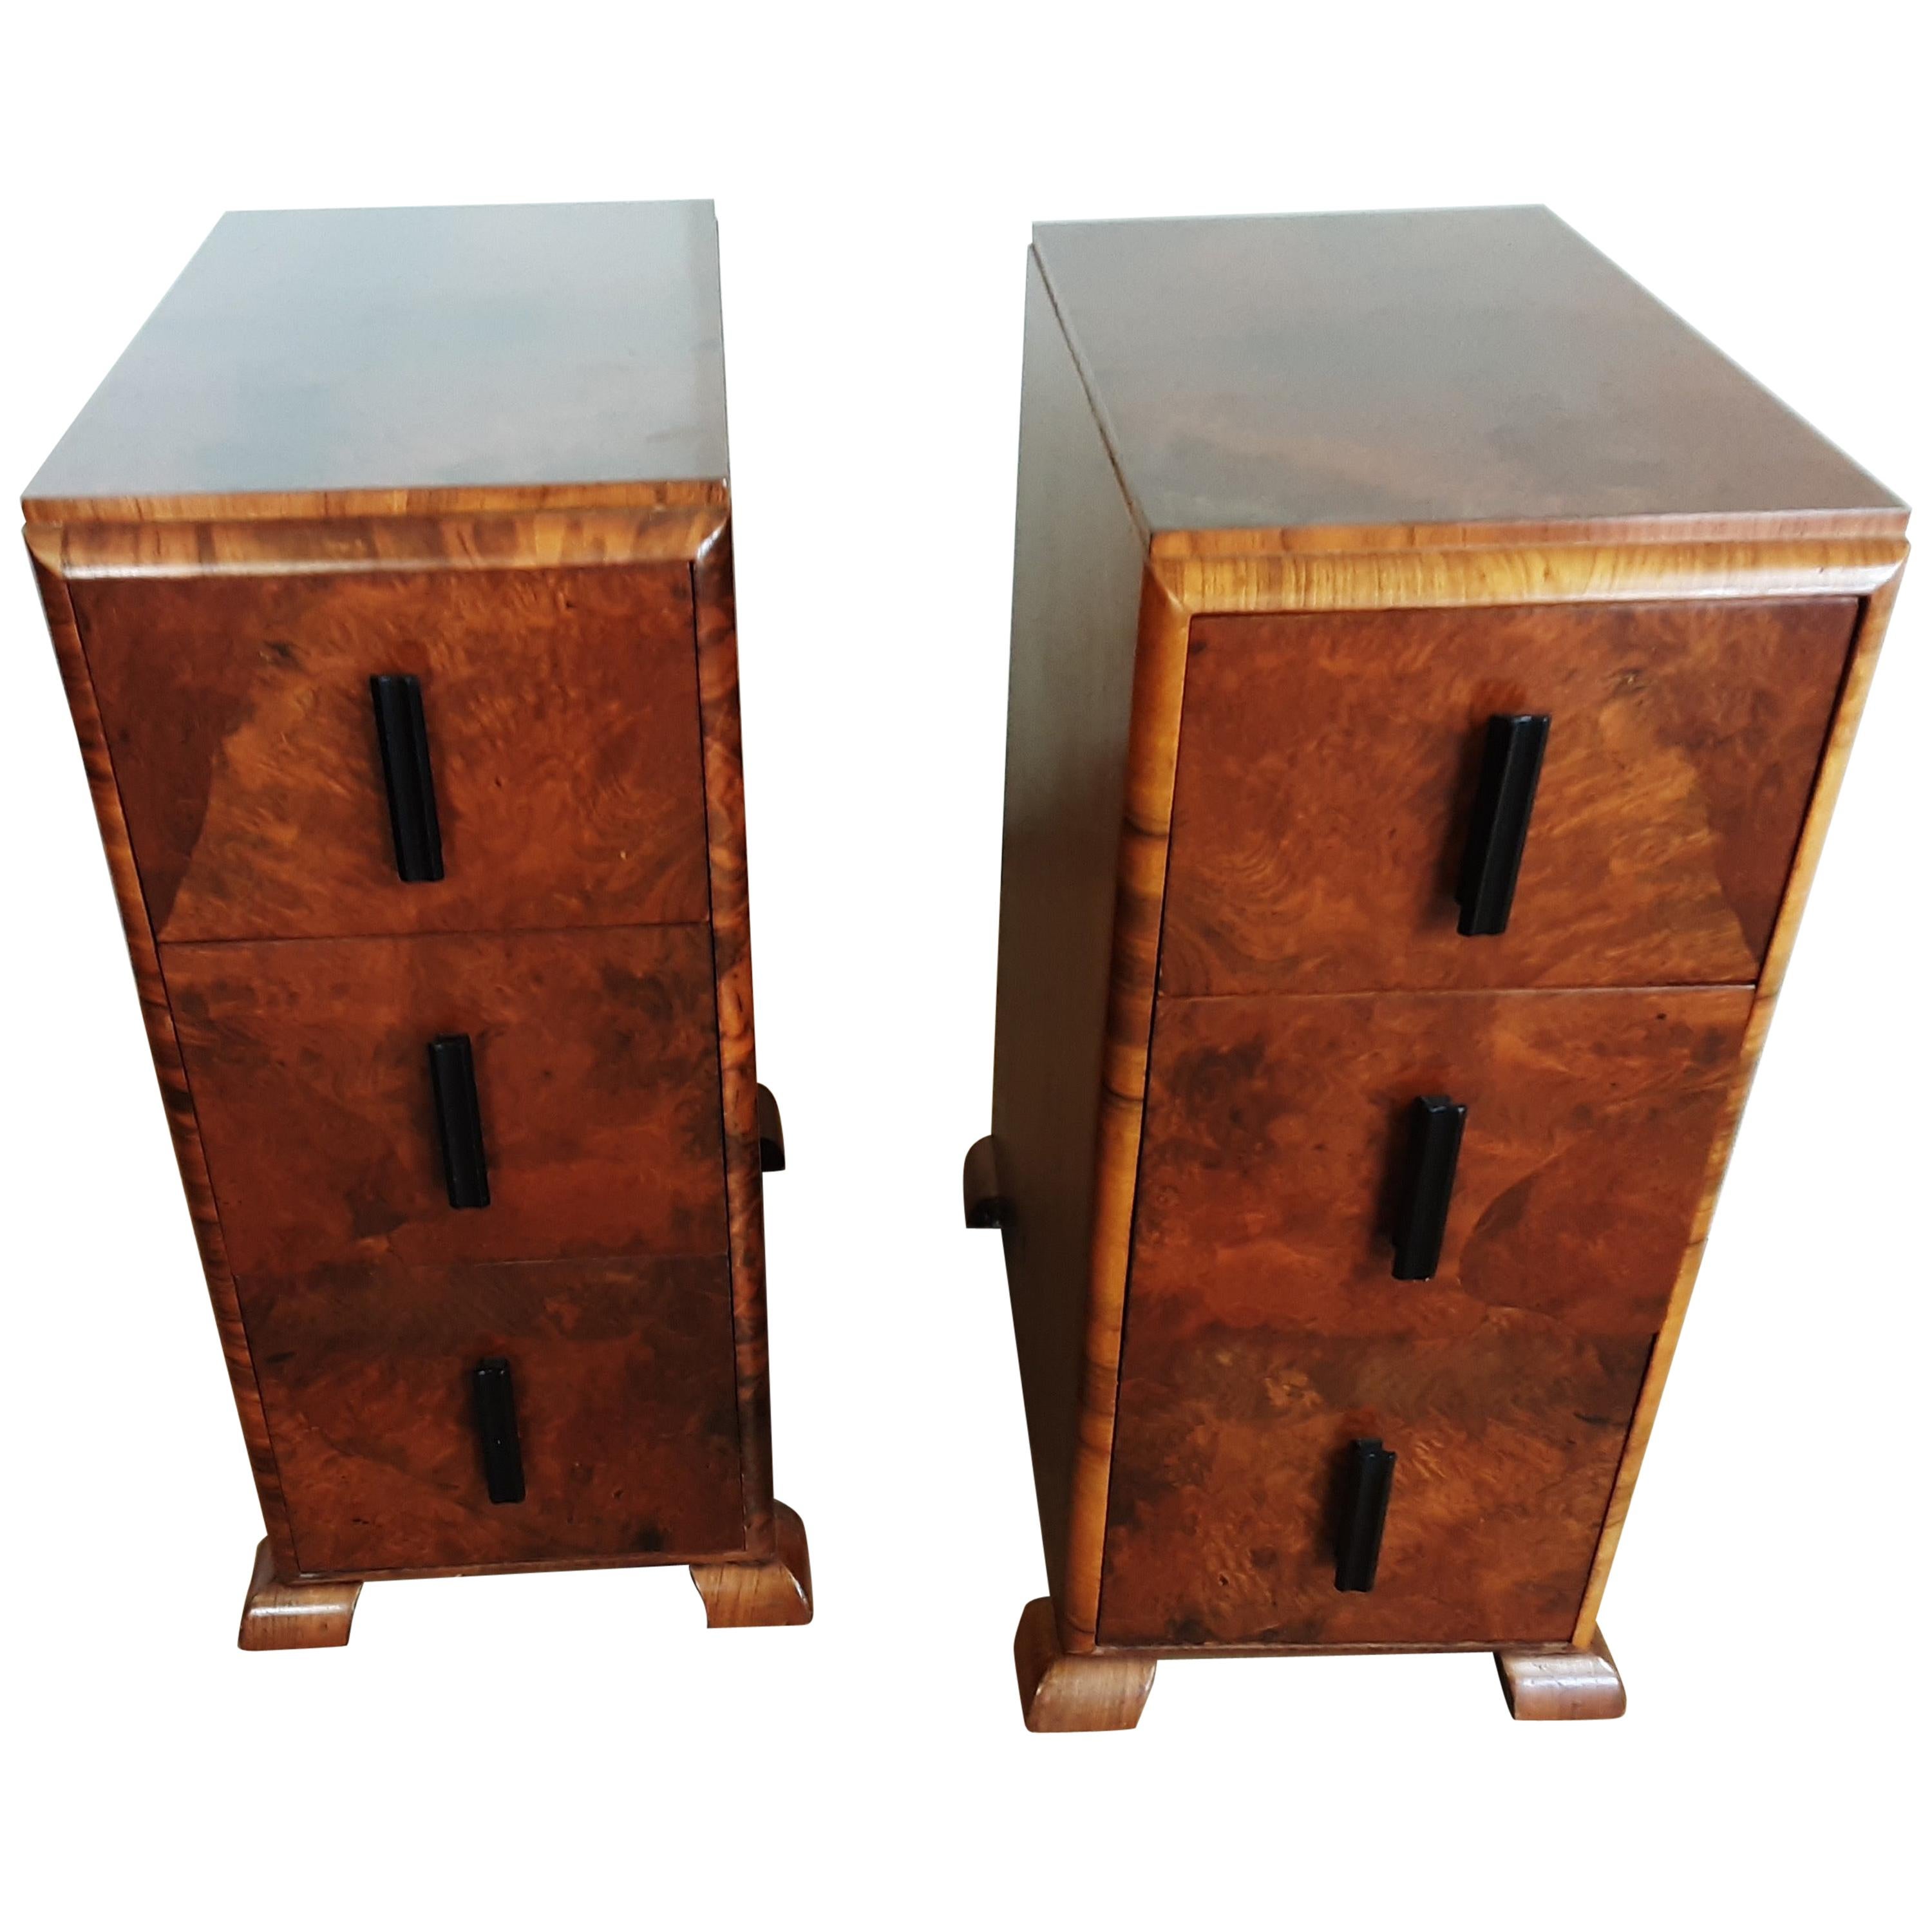 Pair of British Art Deco Bedside Cabinets Brown Burr Walnut from the 1930s